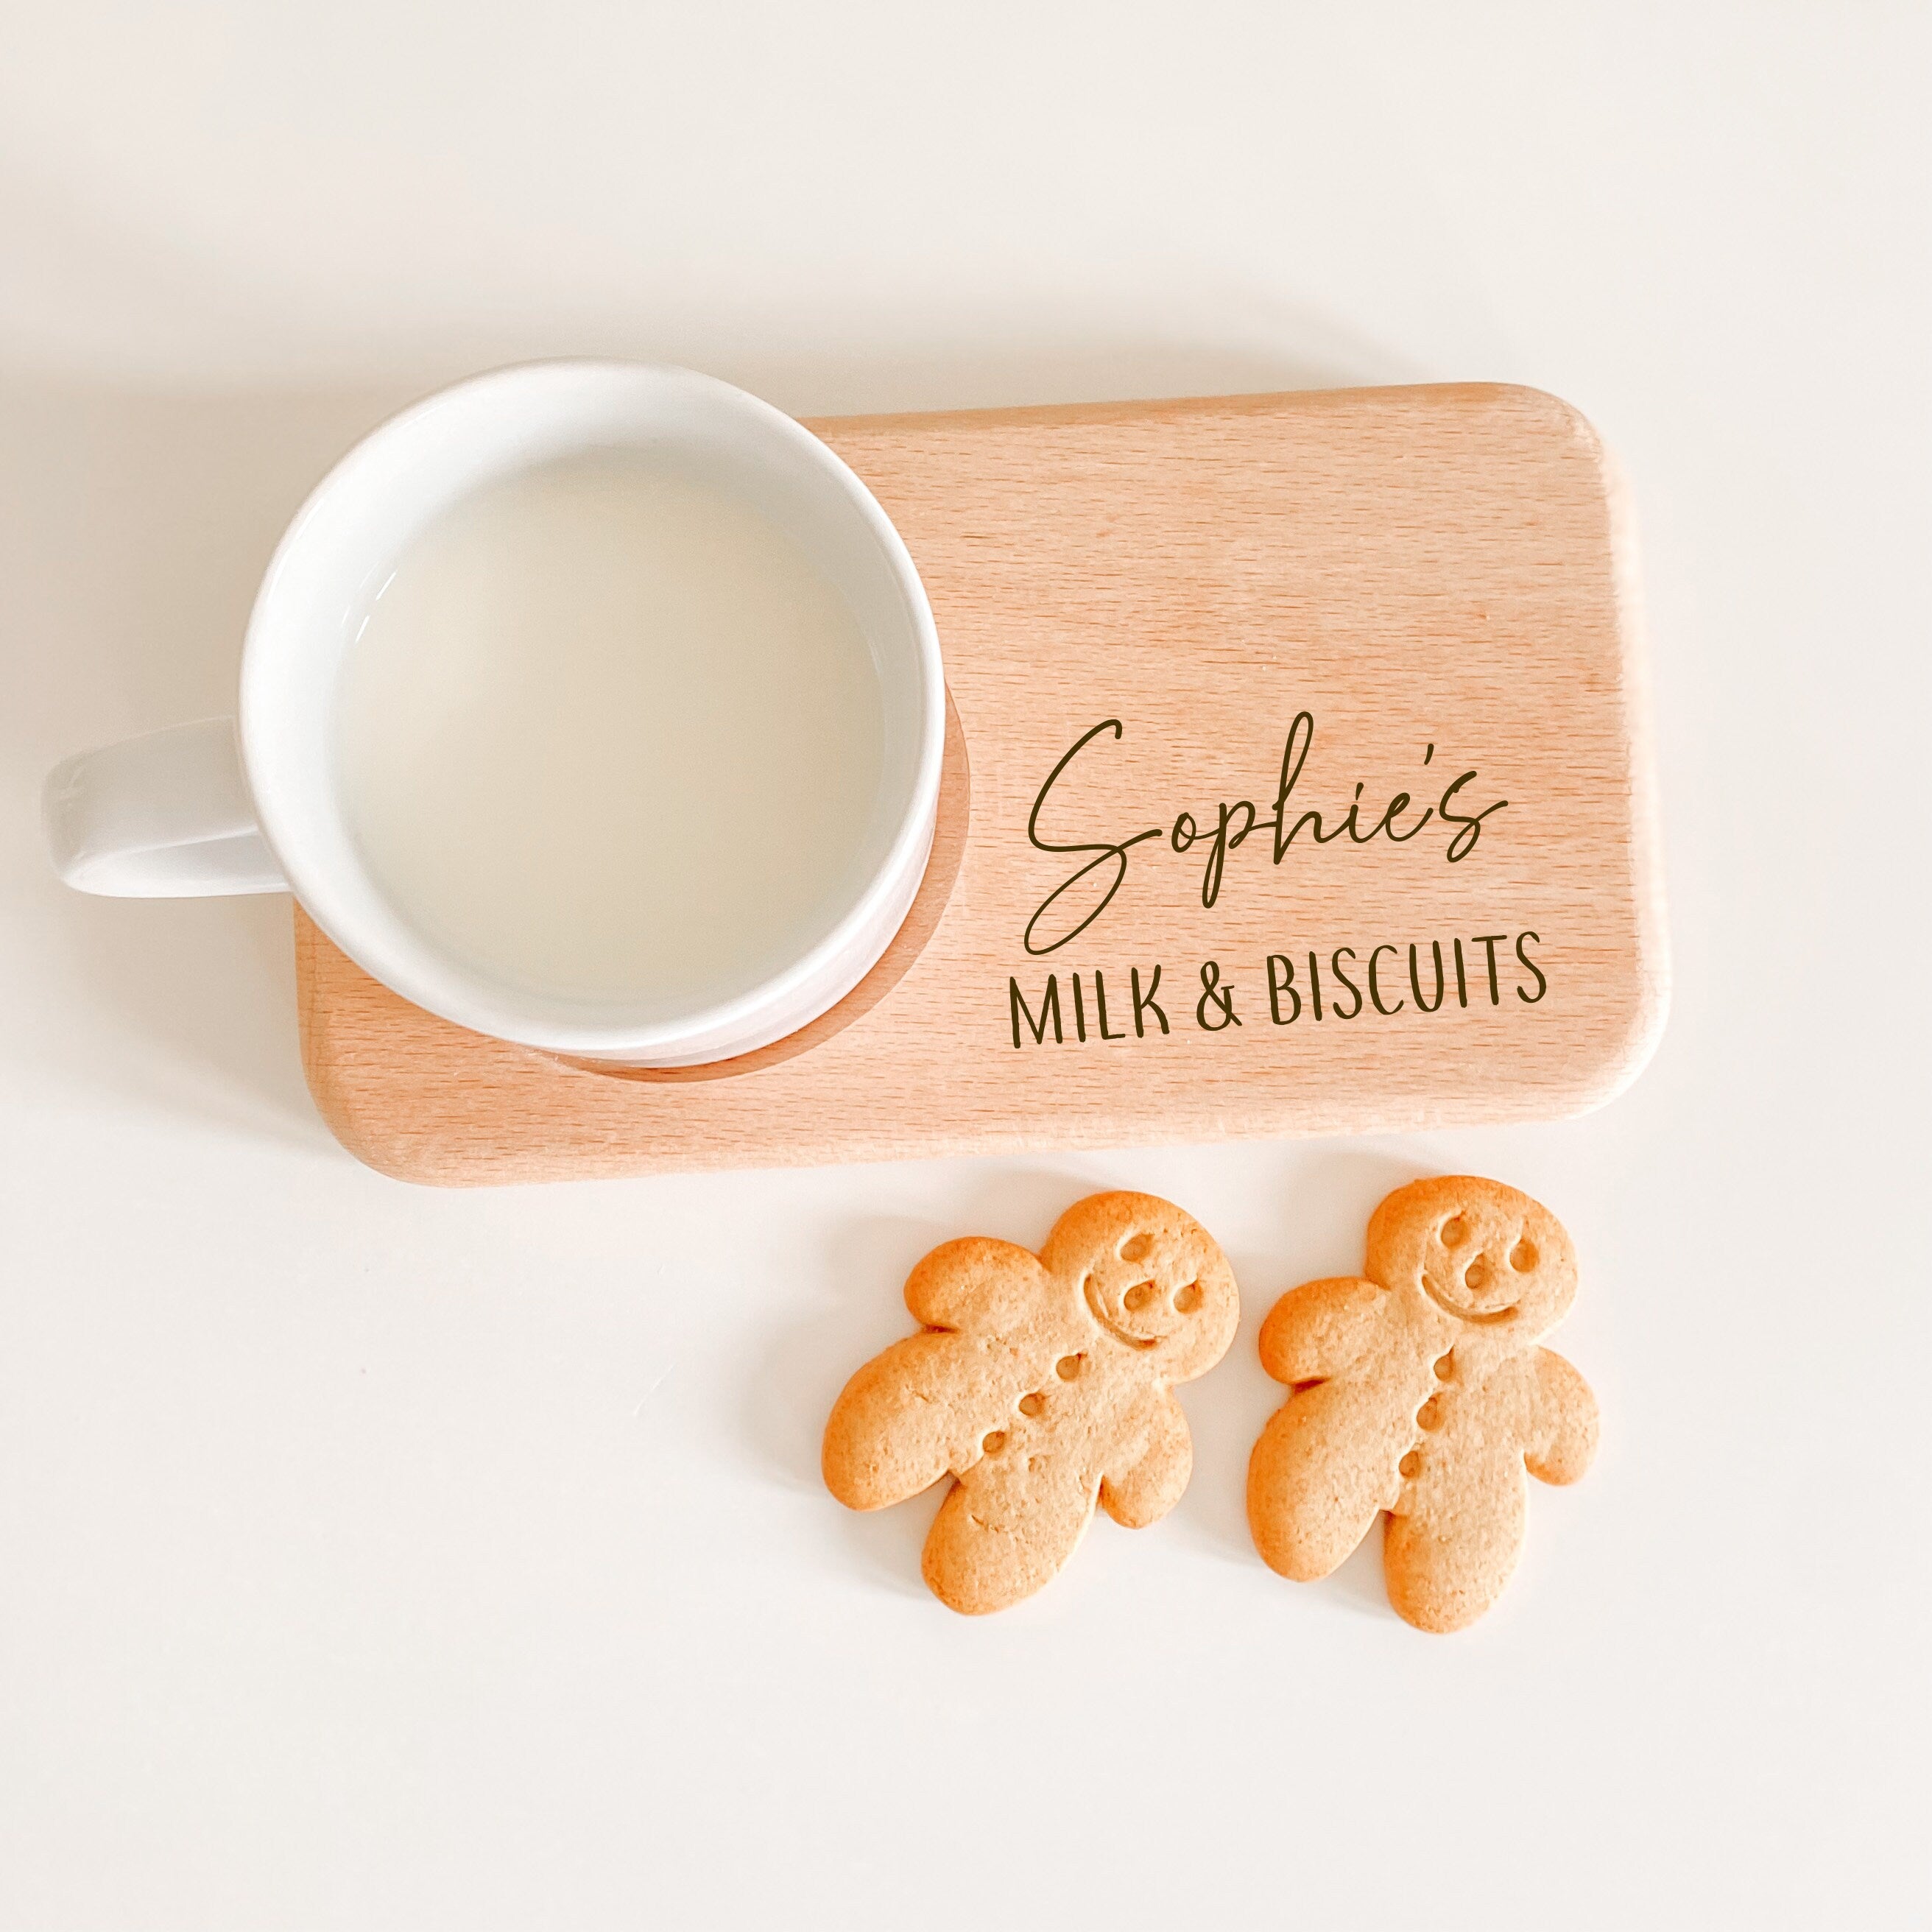 Dad's And Kids Coffee And Treats Engraved Board, Personalised Tea & Biscuits Board